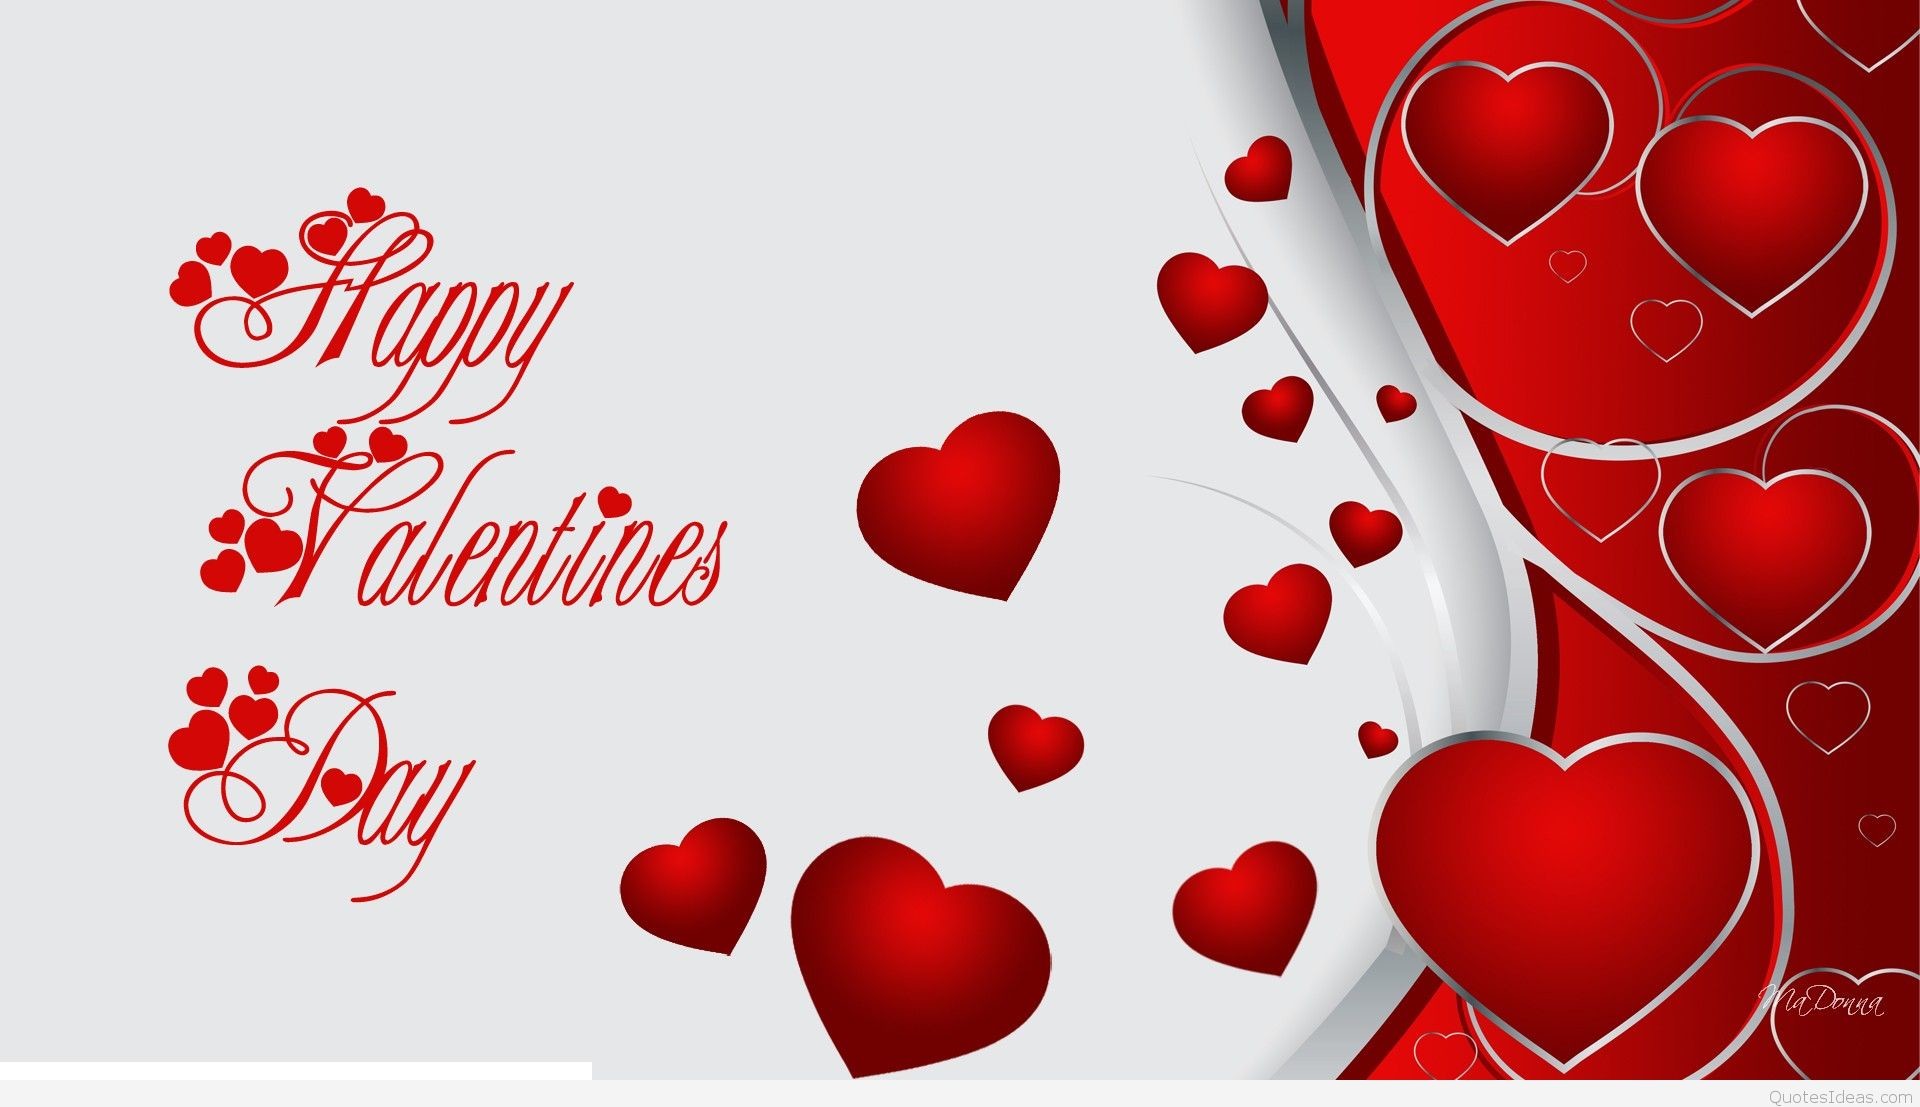 1920x1107 happy-valentine-day-HD-Wallpapers-for-pc2. f20c77c7dc5daf9fa5d4a0b939d04520